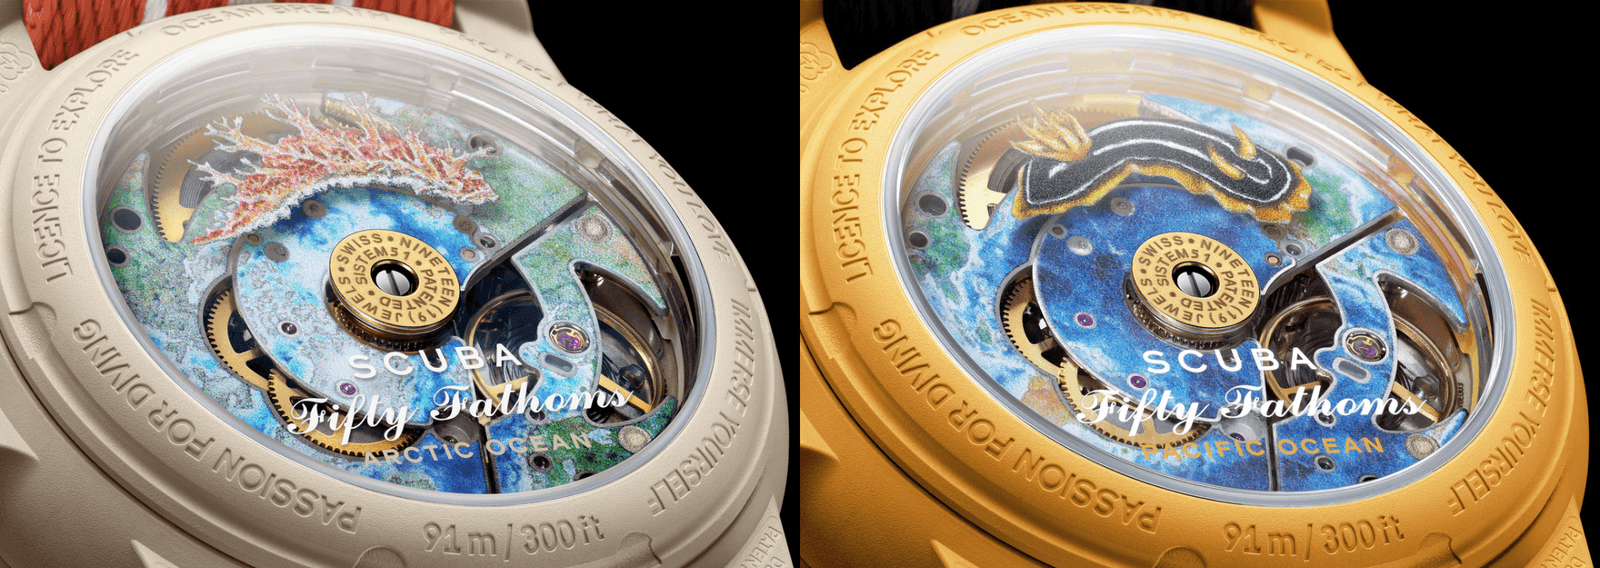 The caseback featuring an illustration